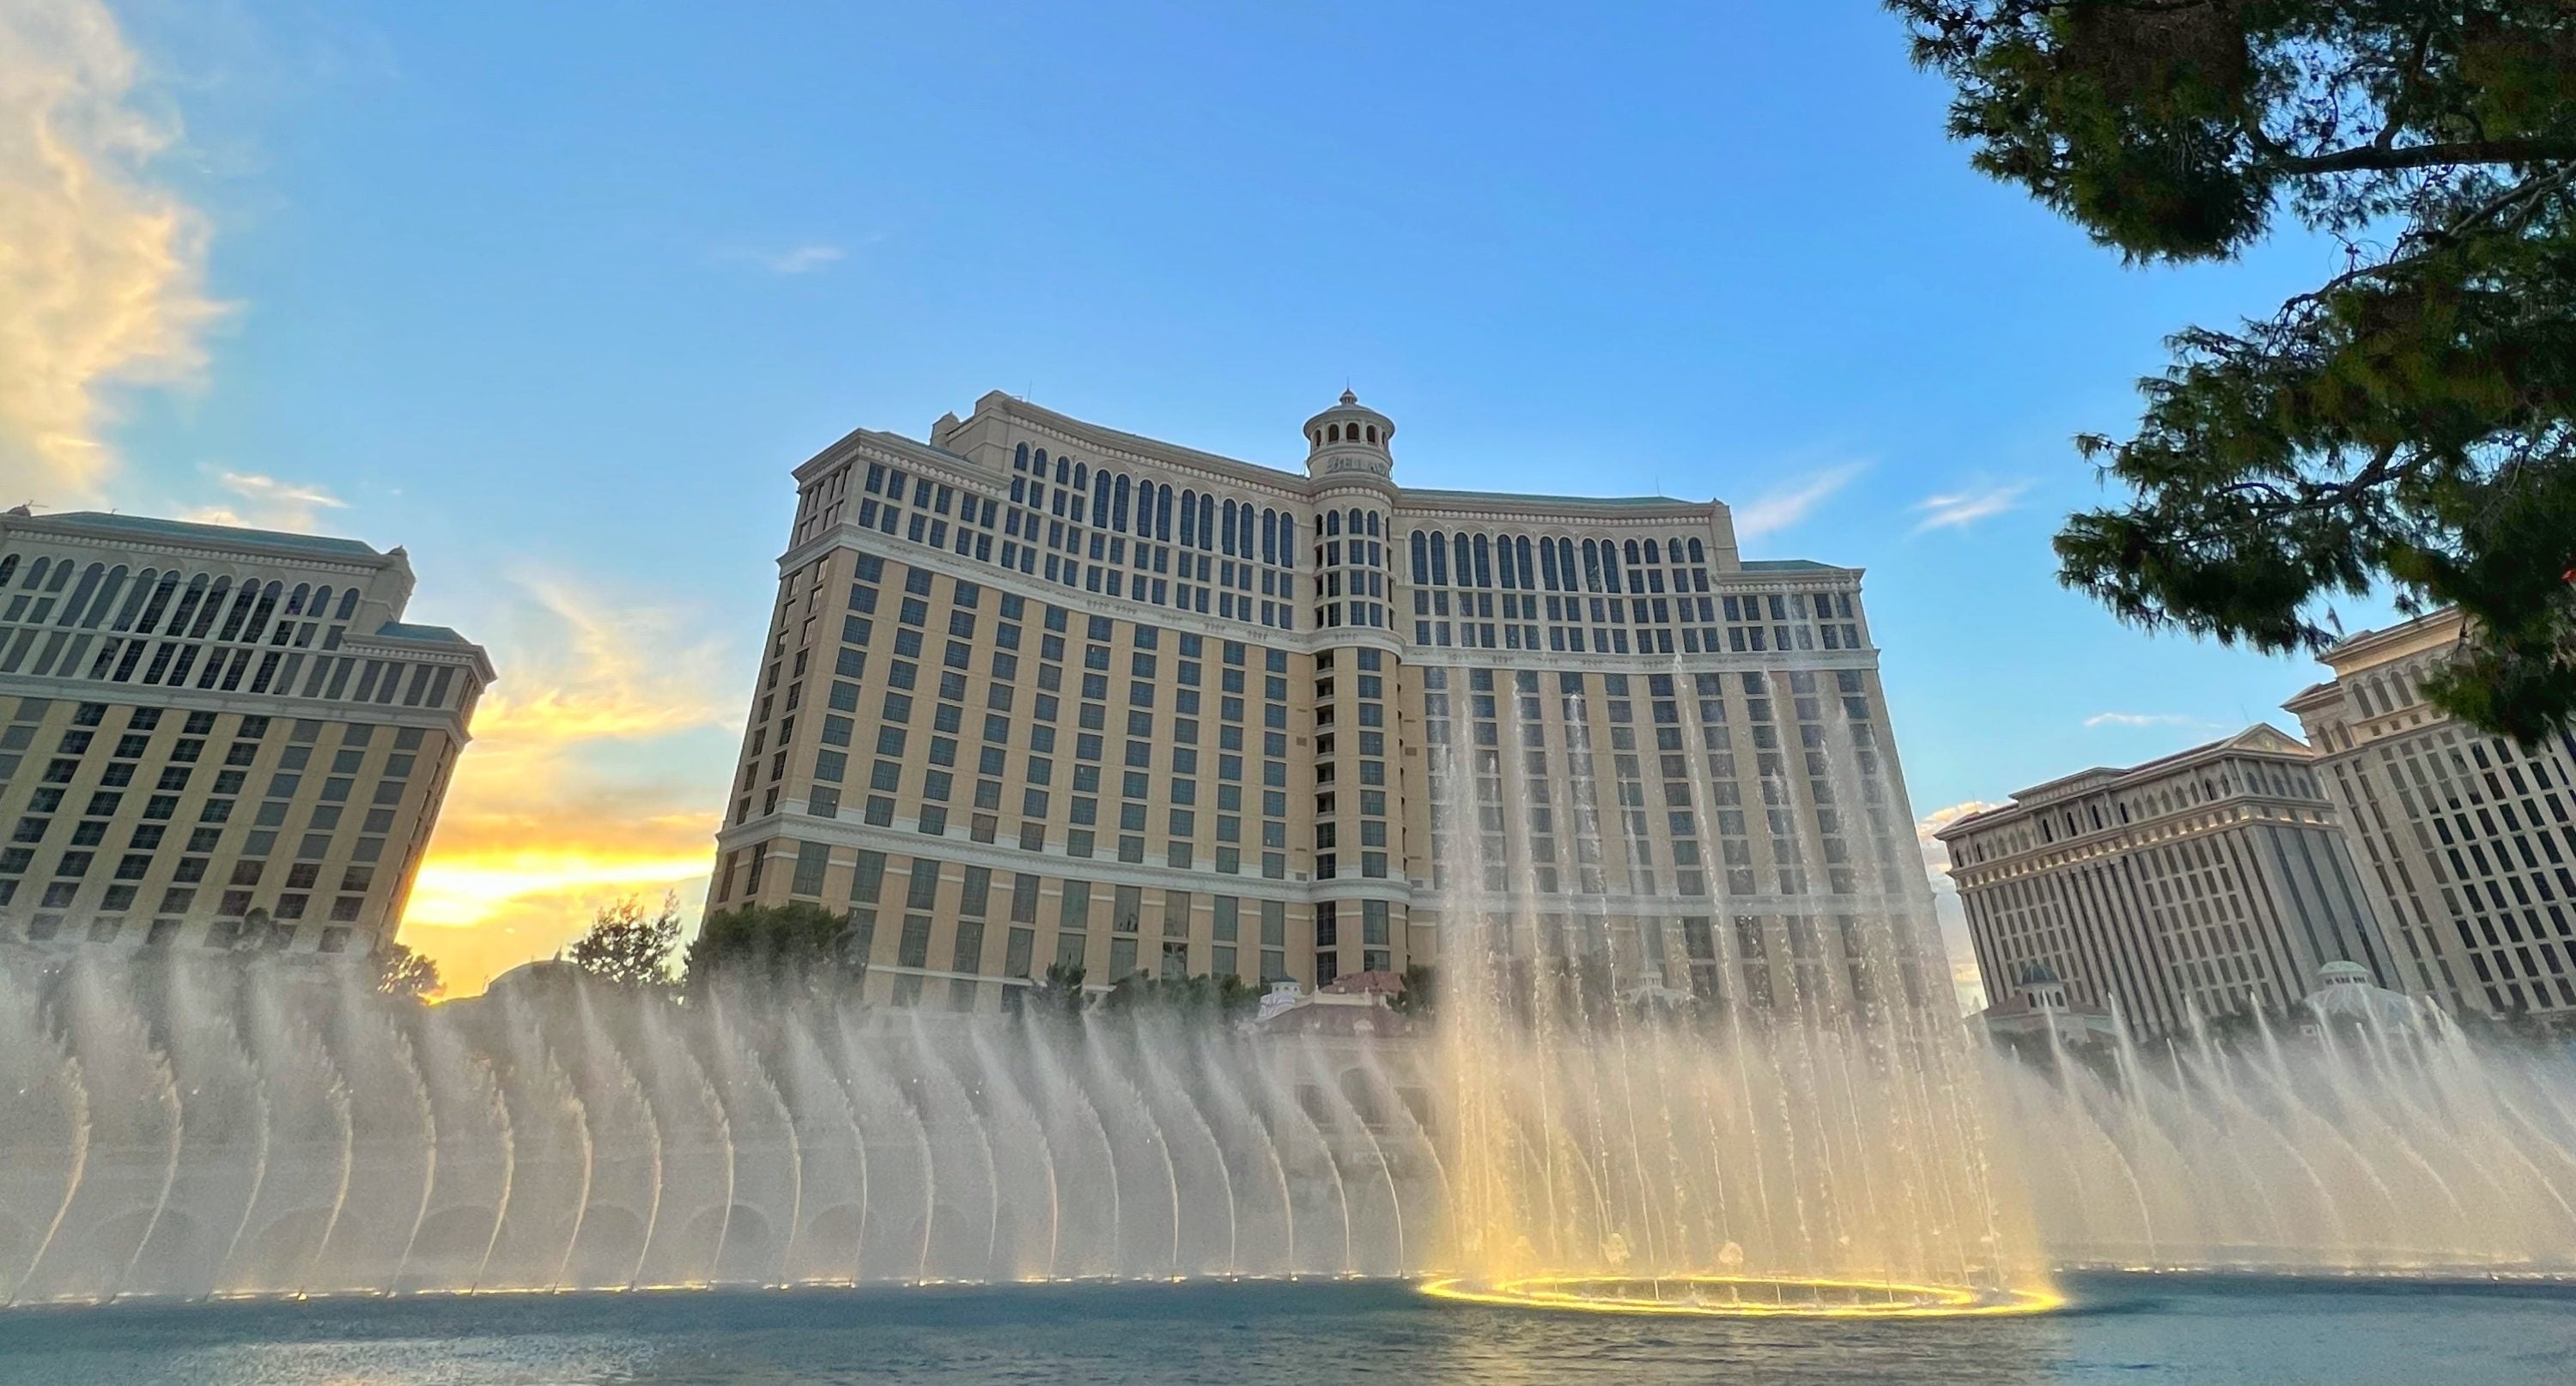 Bellagio fountains during day